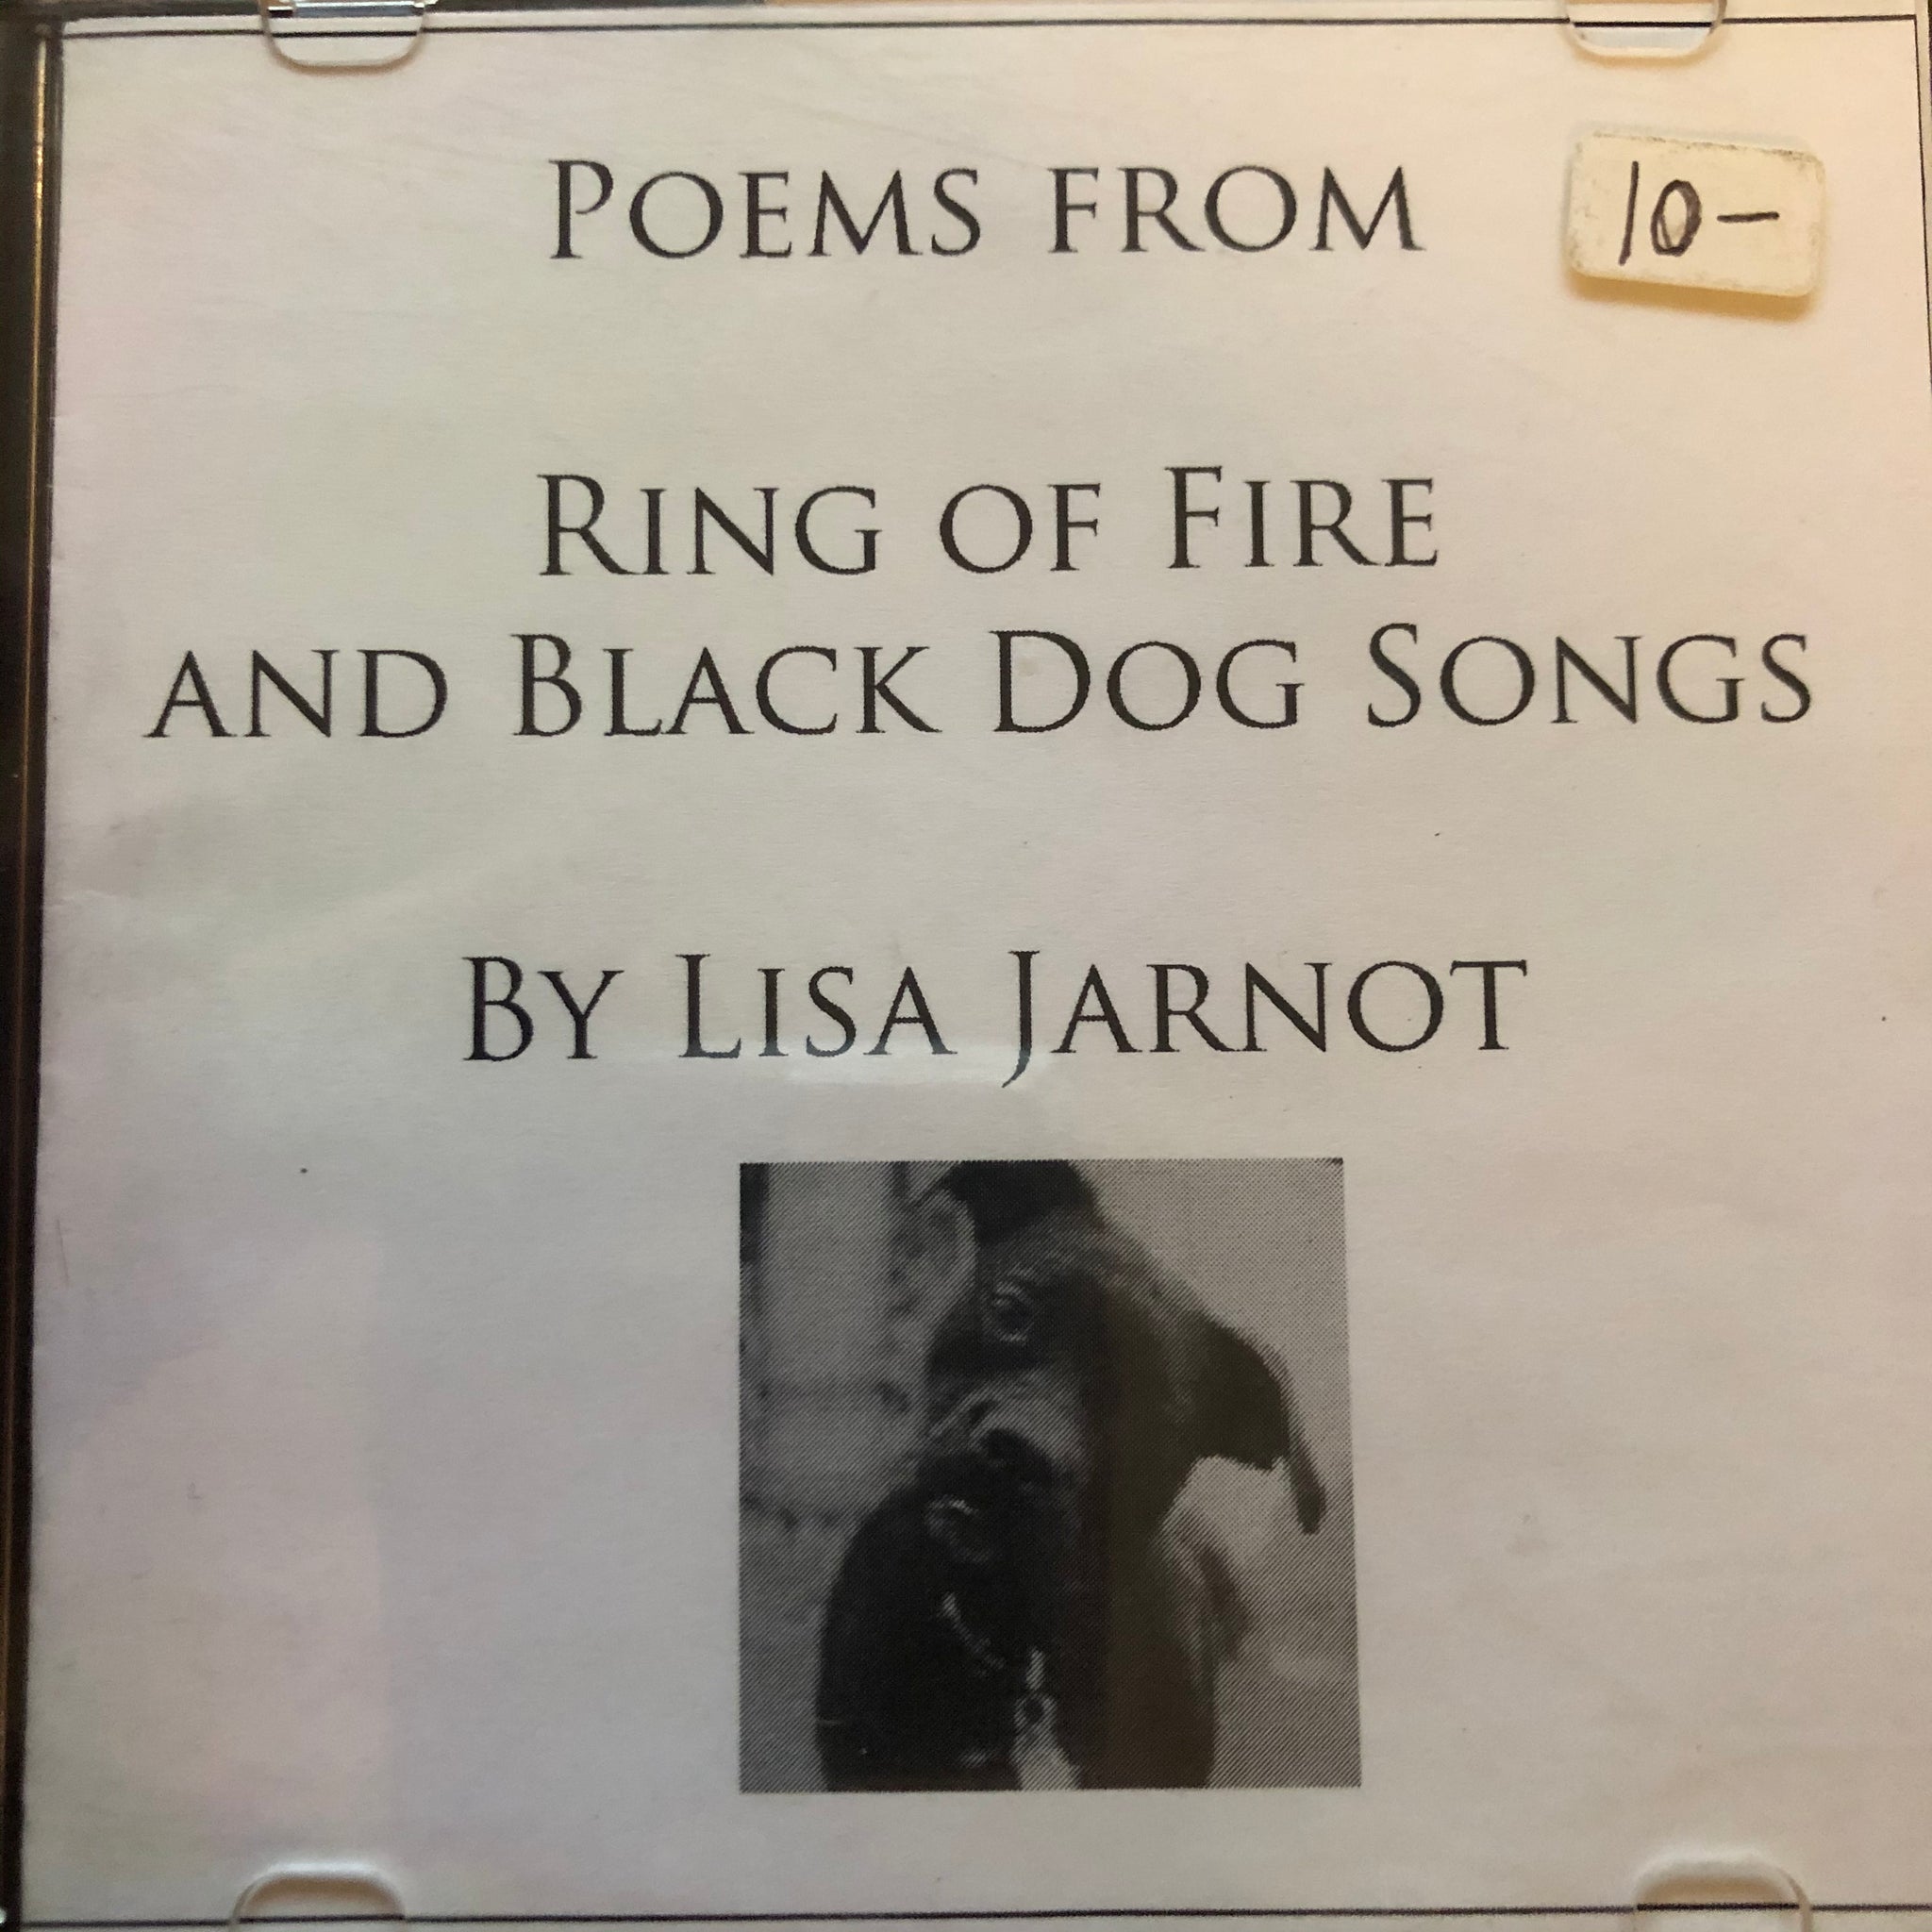 Poems from Ring of Fire and Black Dog Songs